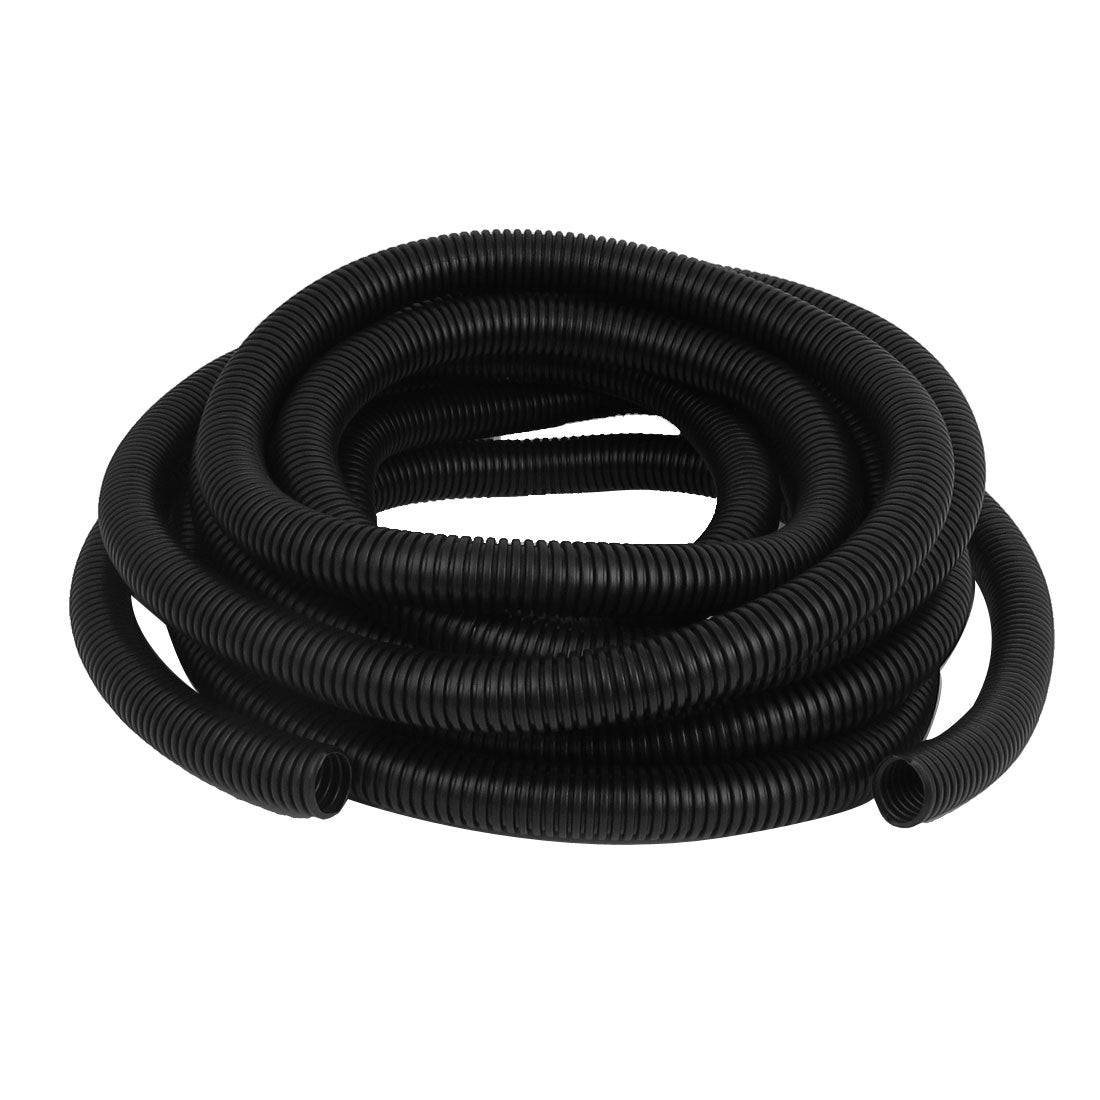 uxcell Uxcell 6.6 M 20 x 25 mm Plastic Corrugated Conduit Tube for Garden,Office Black